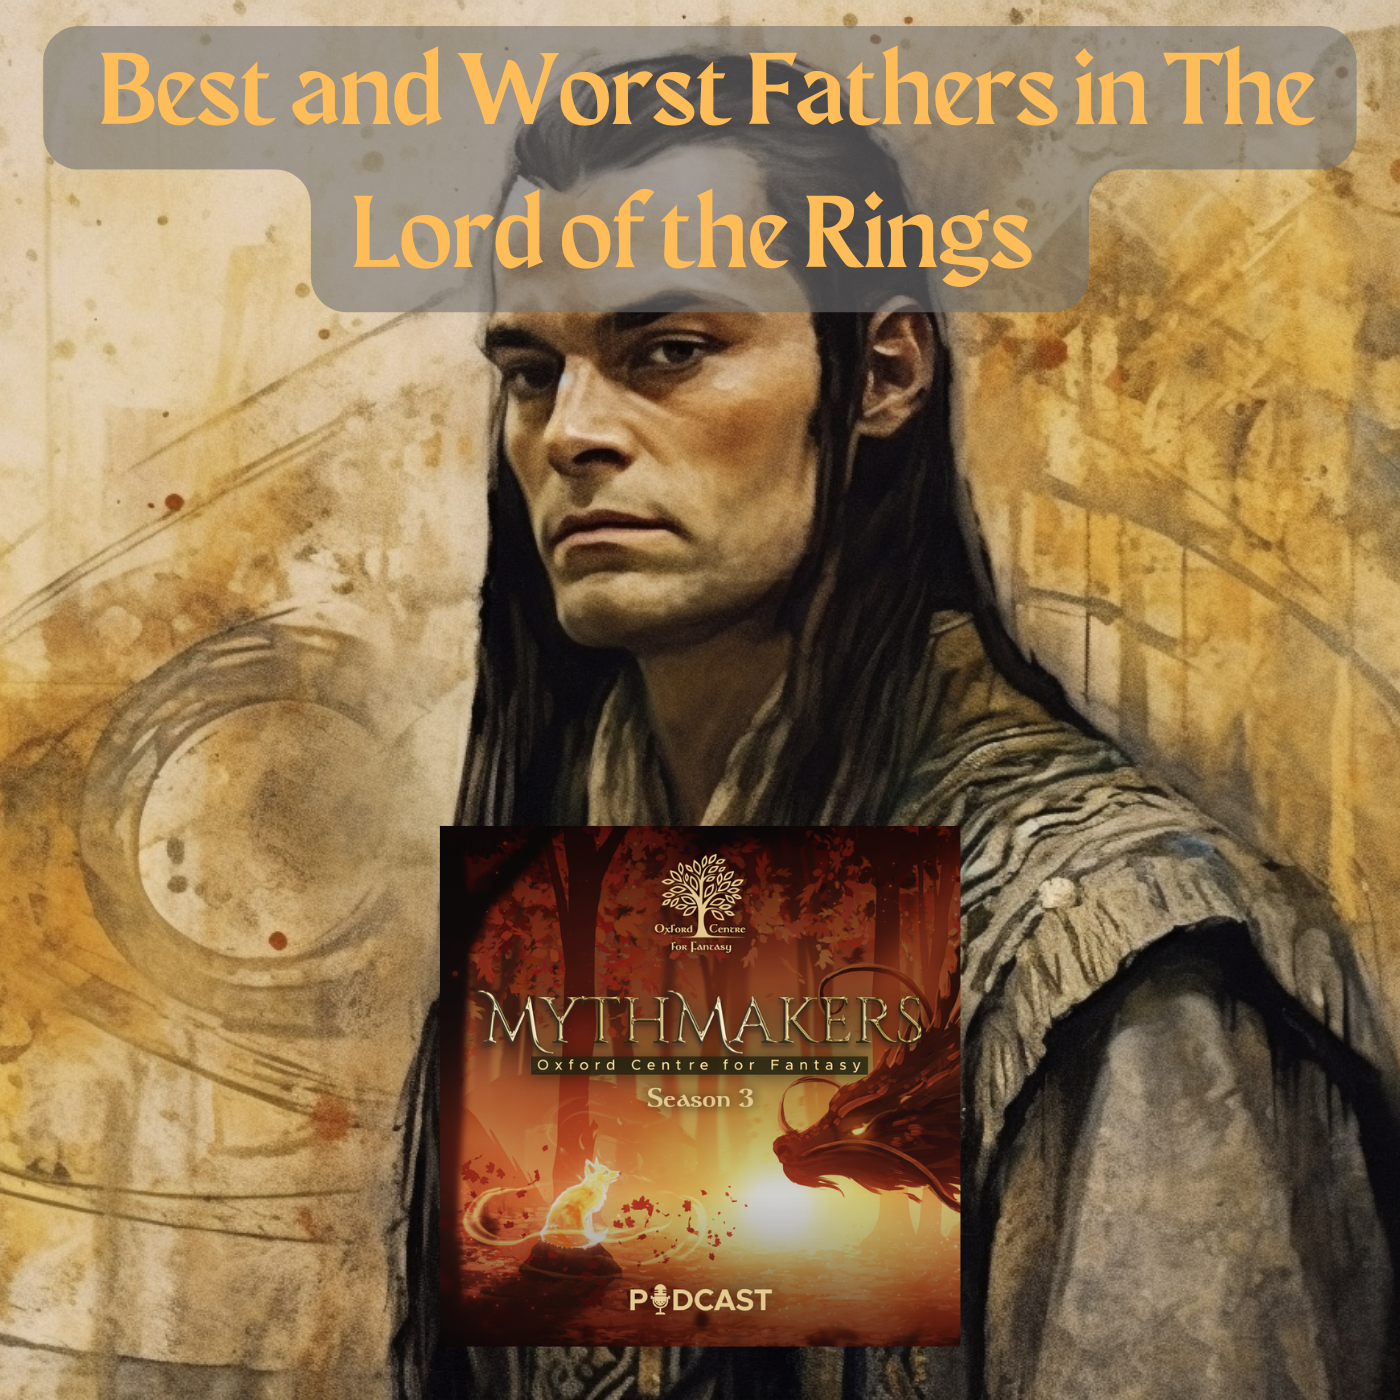 Best and Worst Fathers in The Lord of the Rings